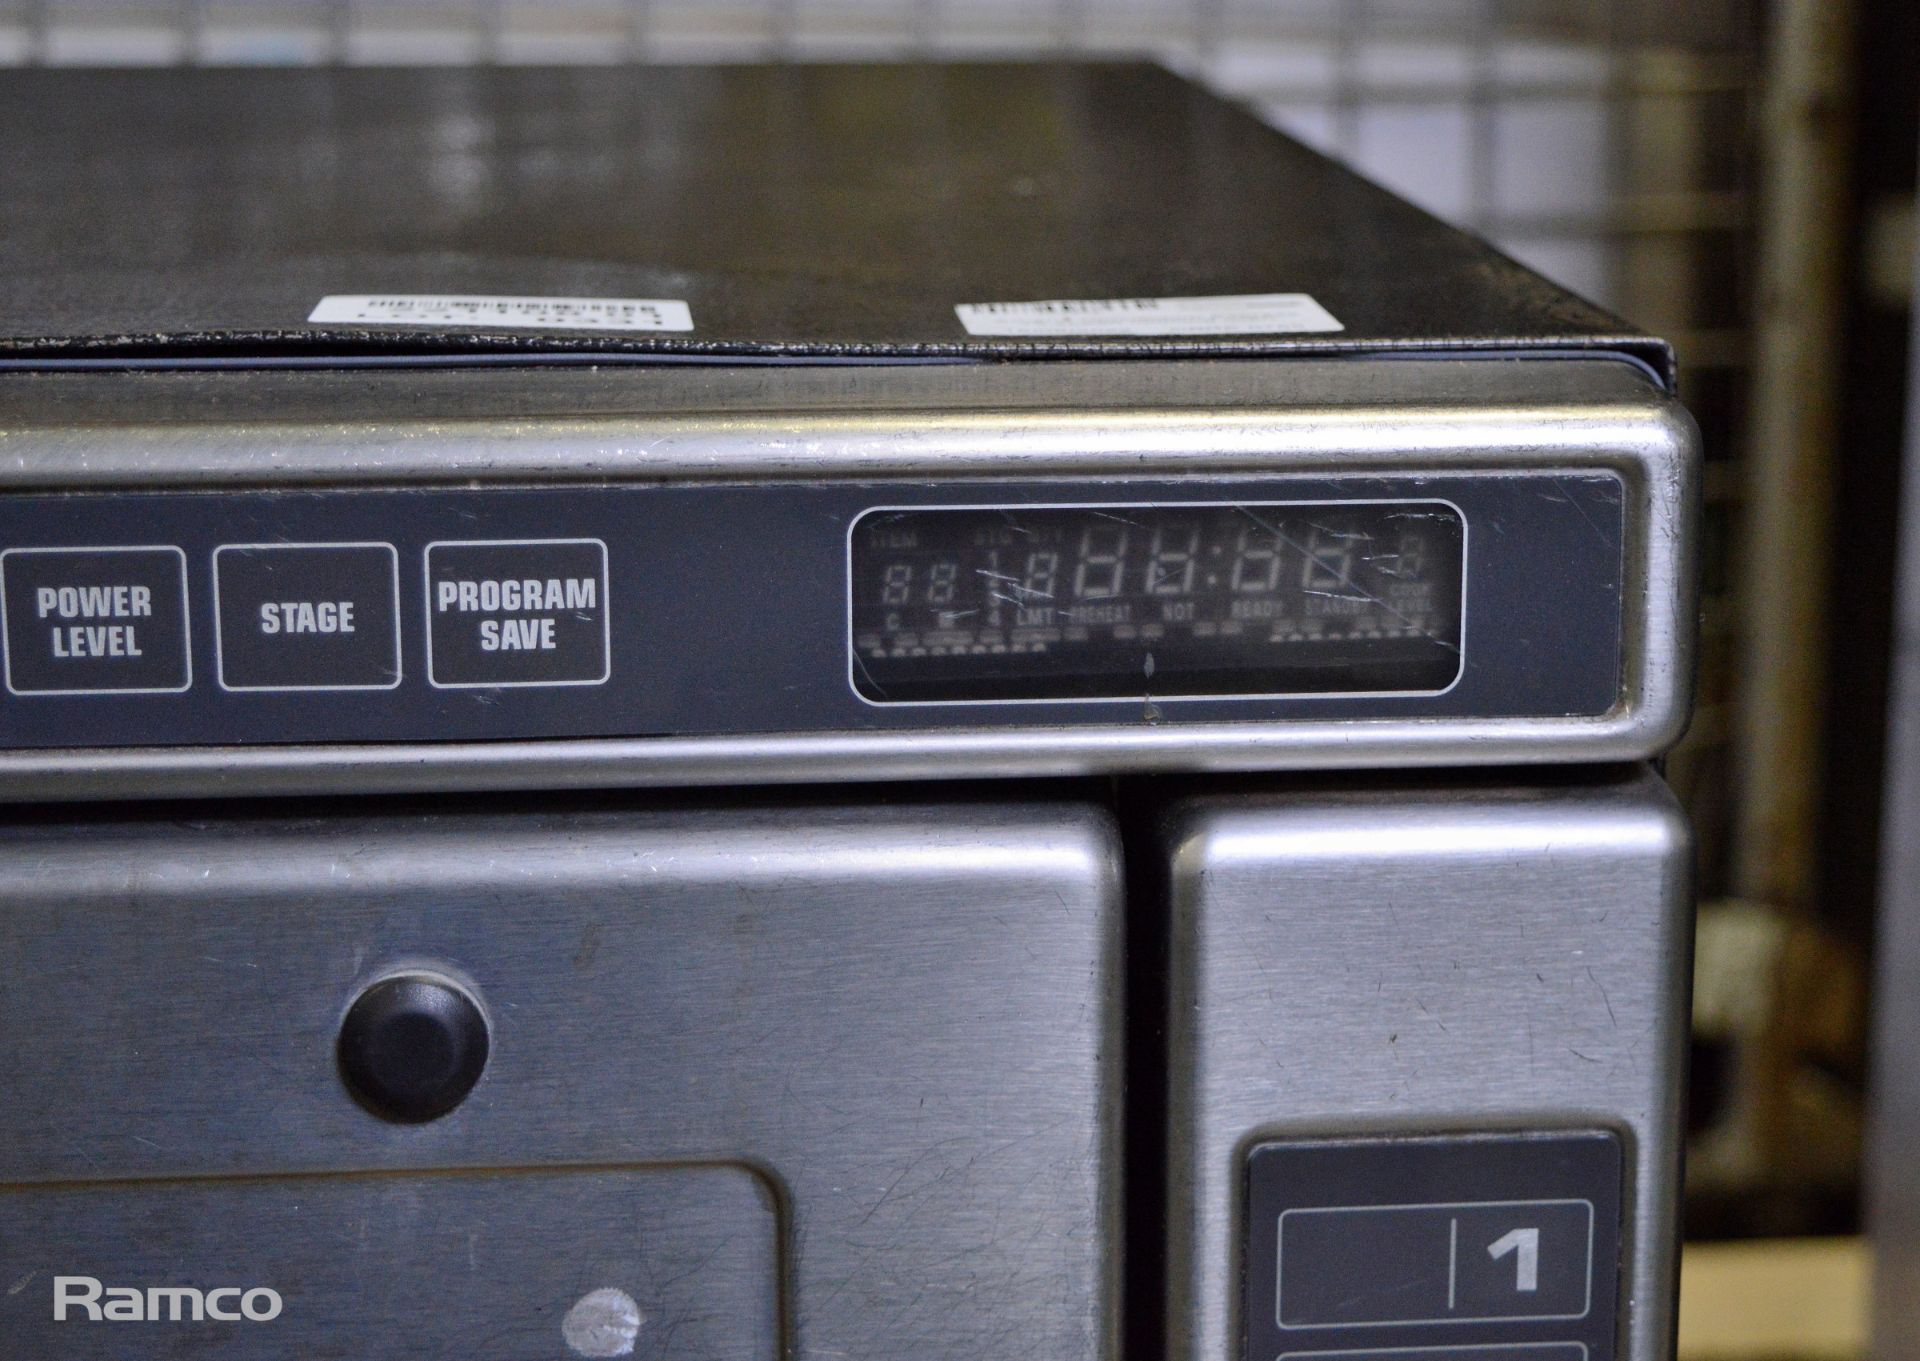 Amana Convection Express Hi-speed cooking oven - Image 4 of 5